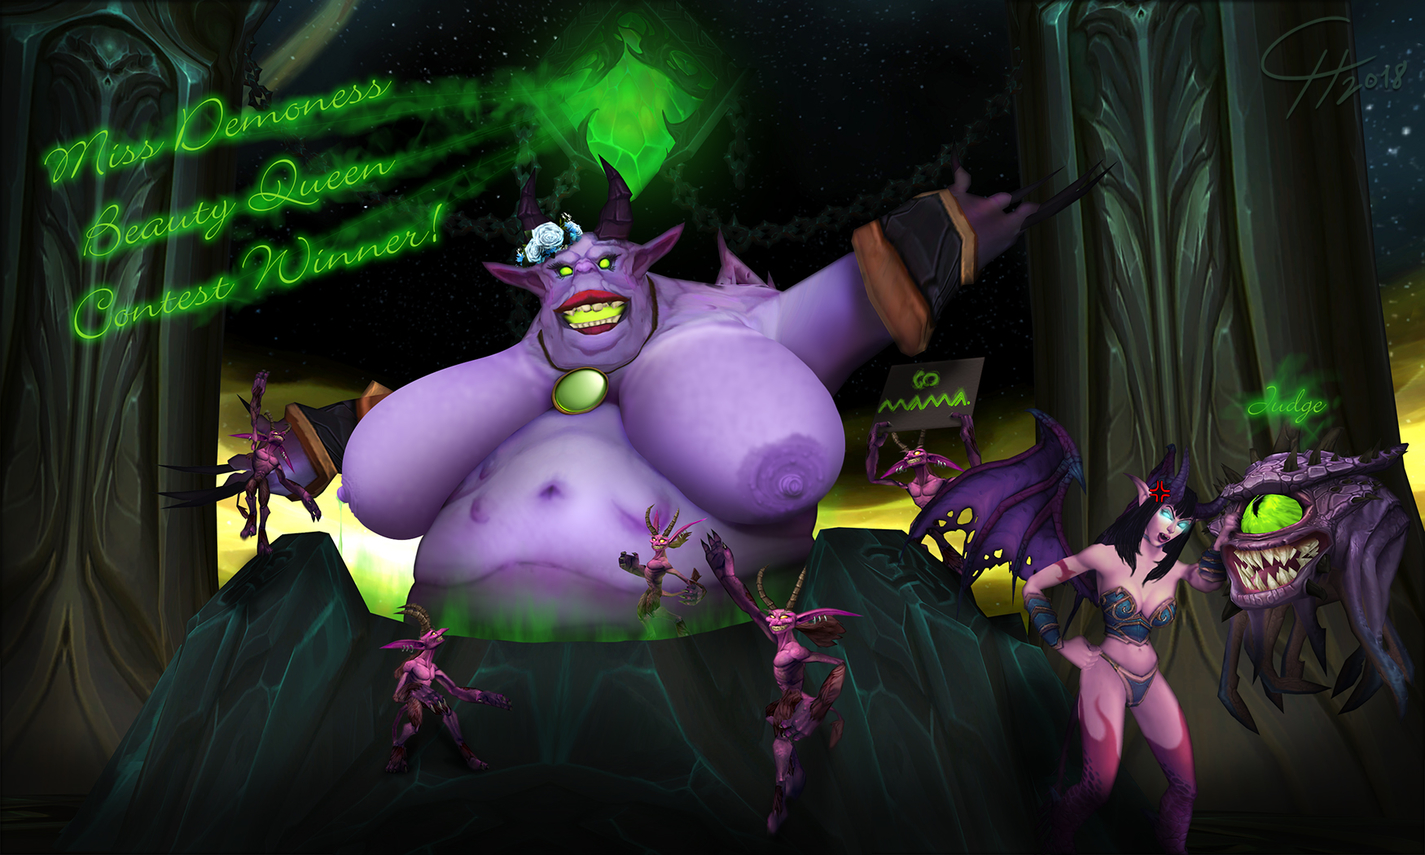 Miss Demoness Beauty Queen [Demon/Pinup/BBW]
[i]Time for something different.[/i]
The minions of the Legion might have gotten bored
while waiting to be summoned into a new world.
This is one of the activities they held while spending time.
[b][url=http://bakaras.com/murlocish/albums/userpics/10001/MsDemonessCont-18XL.jpg]==XL-Size Edit==?[/url][/b]
Keywords: Mob;Demon;Pinup;BBW